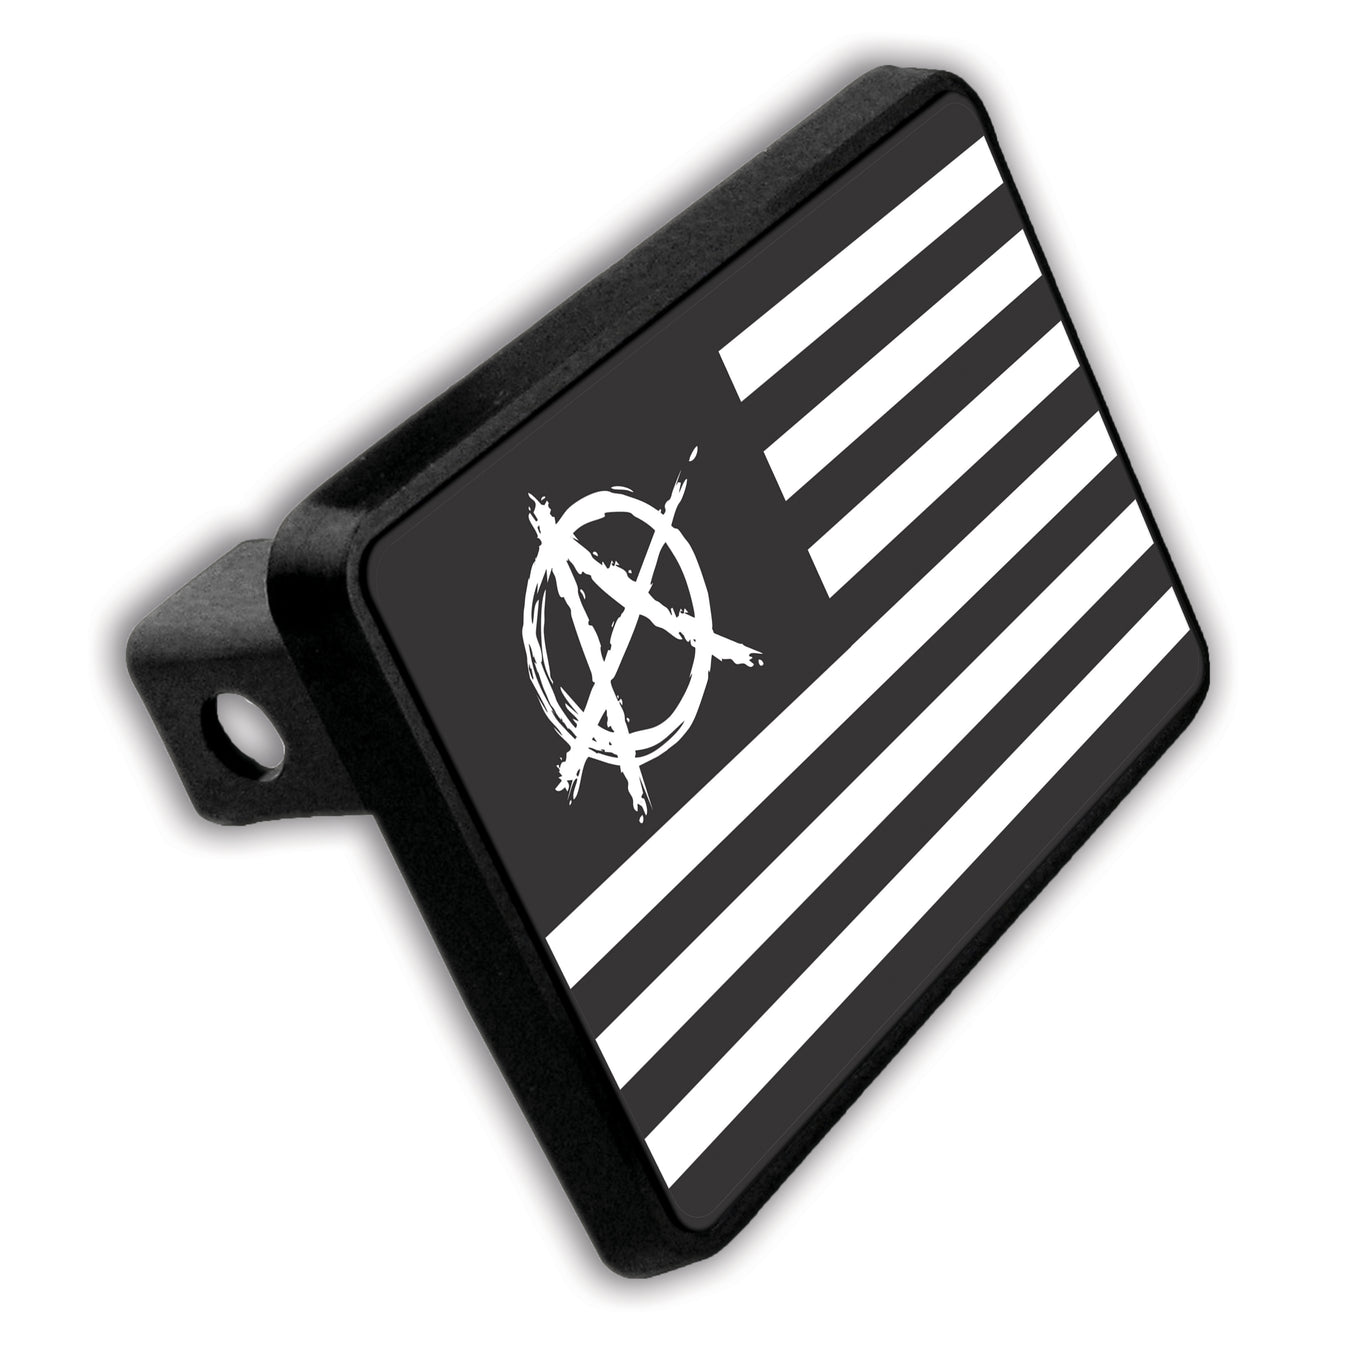 Trailer Hitch Covers - Apedes Flags And Banners